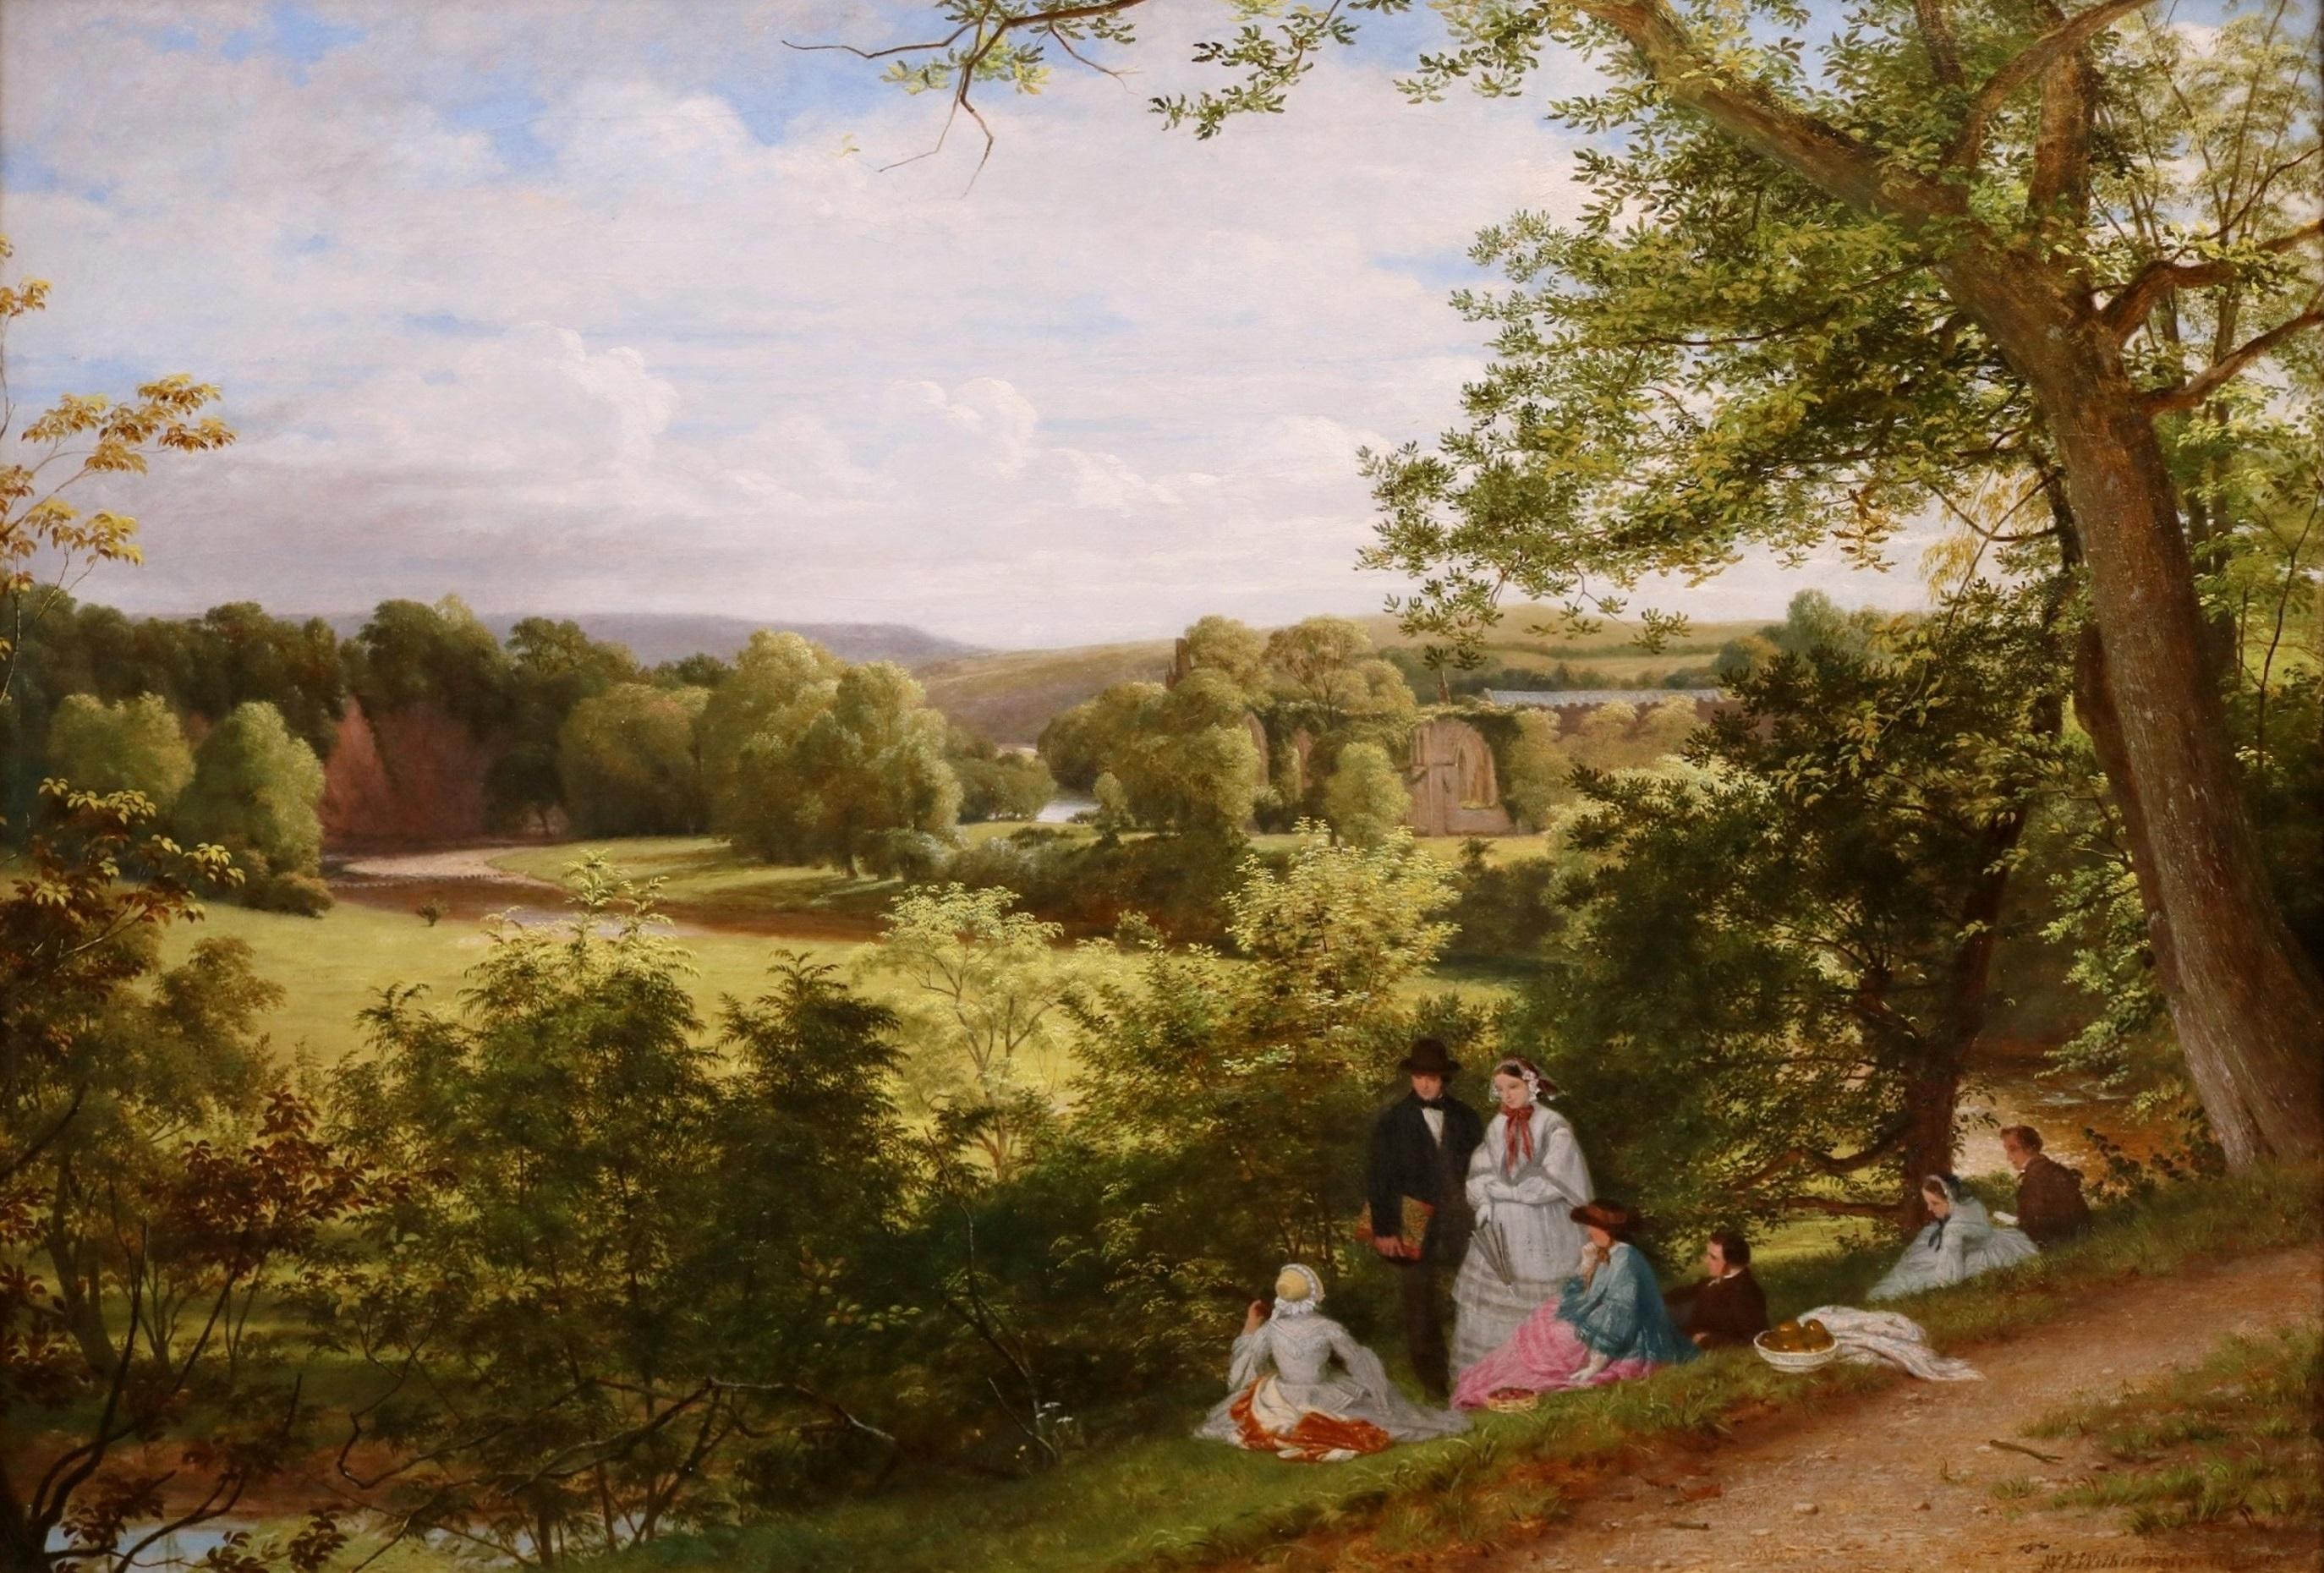 A Day in the County - Large 19th Century Landscape Royal Academy Oil Painting  1